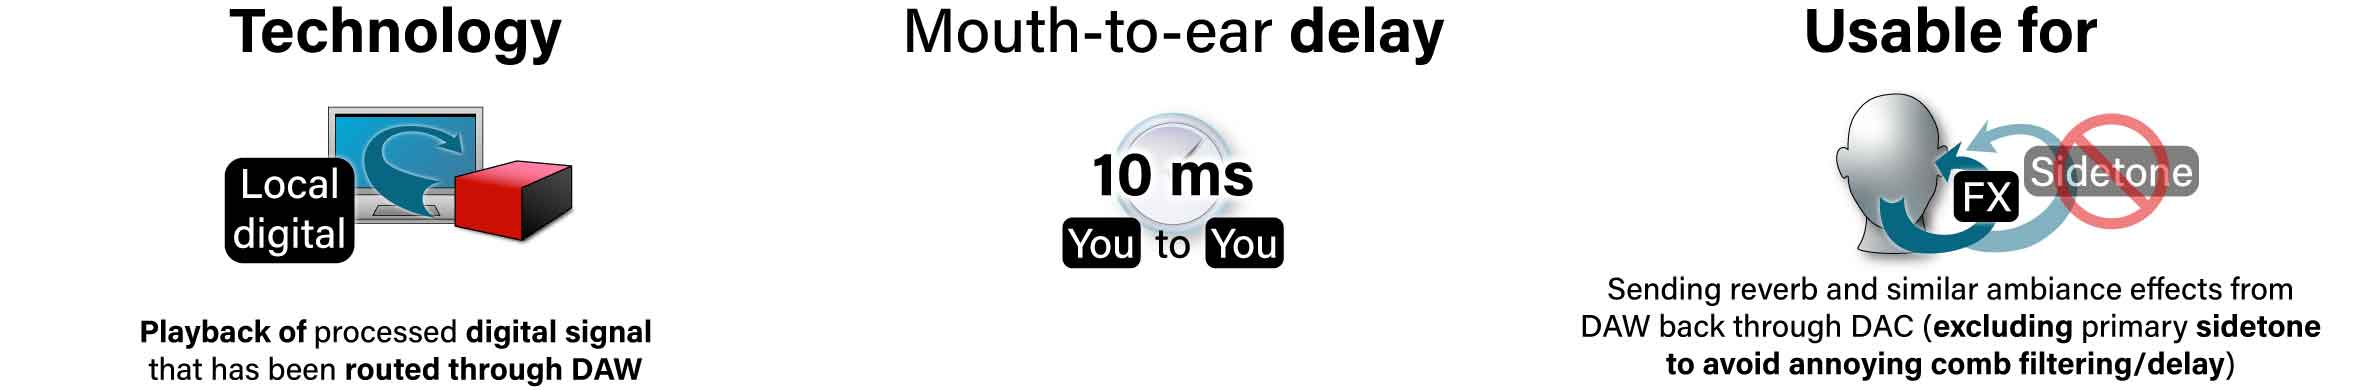 Illustration of local digital monitoring achieving 10 milliseconds of delay from your mouth to your ear, which is suitable for ambience effects mixed on top of an analog zero-latency sidetone